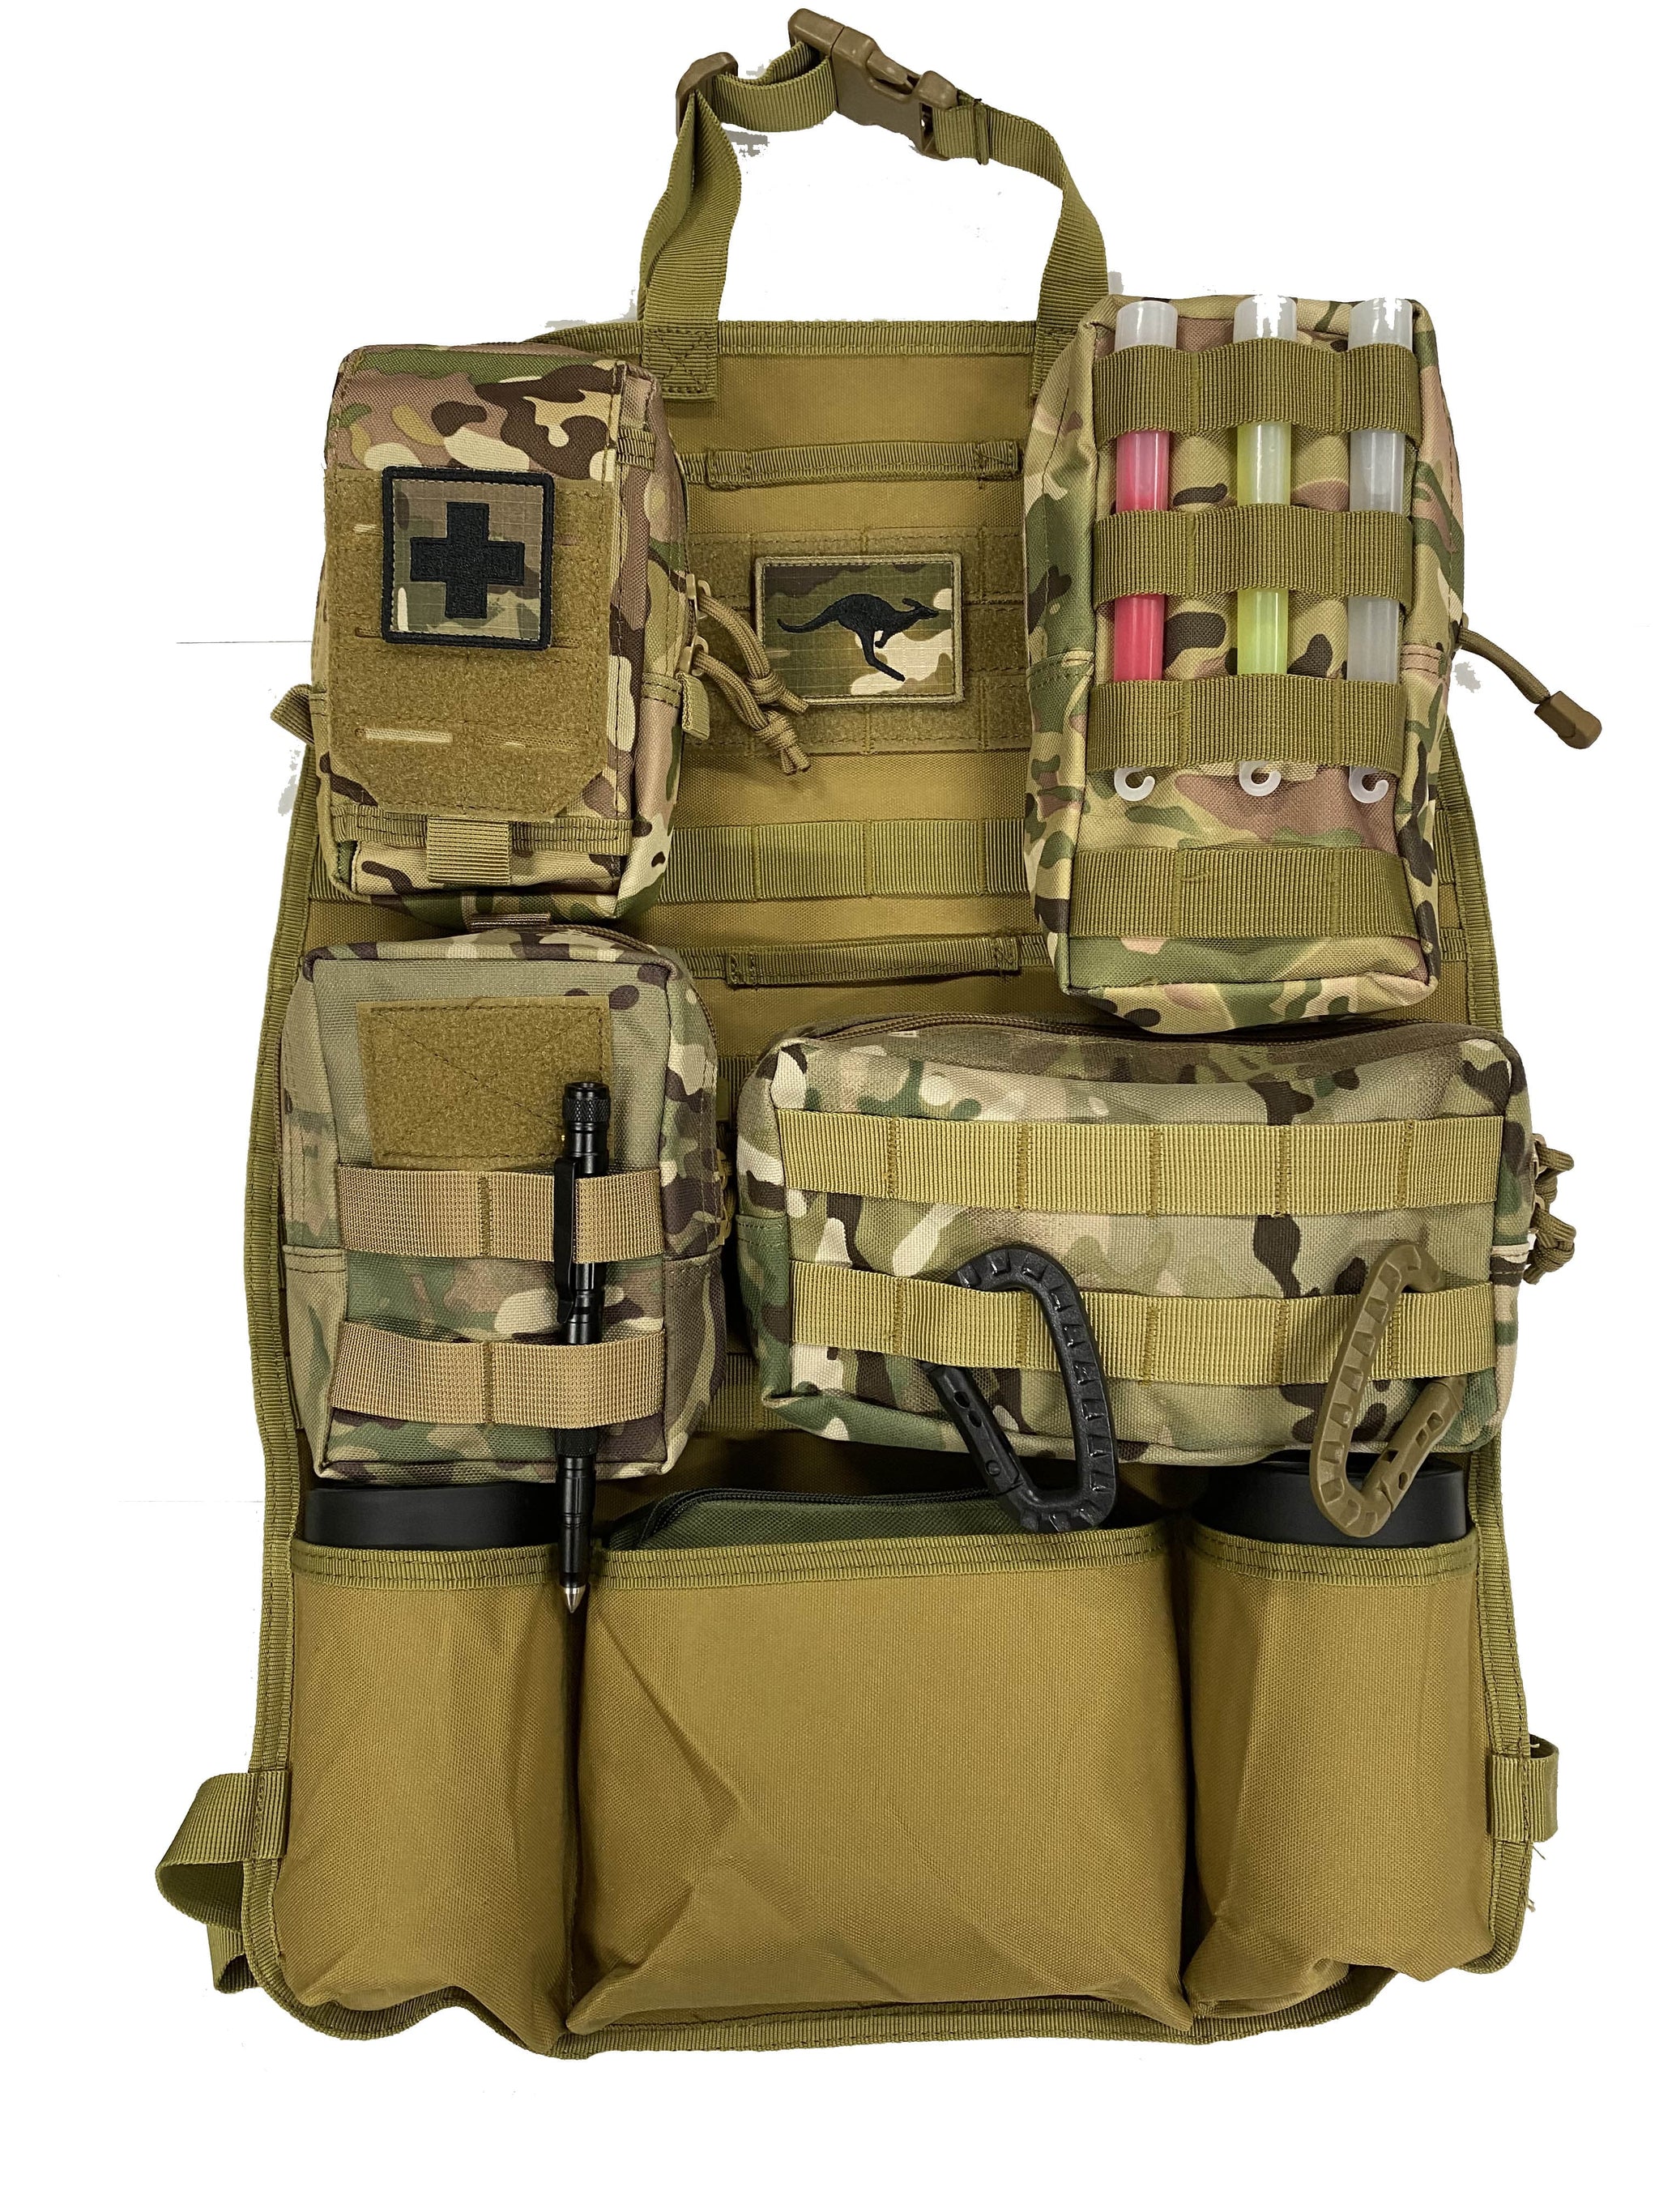 RECON Mil Spec Tactical seat organizer complete with 4 MOLLE